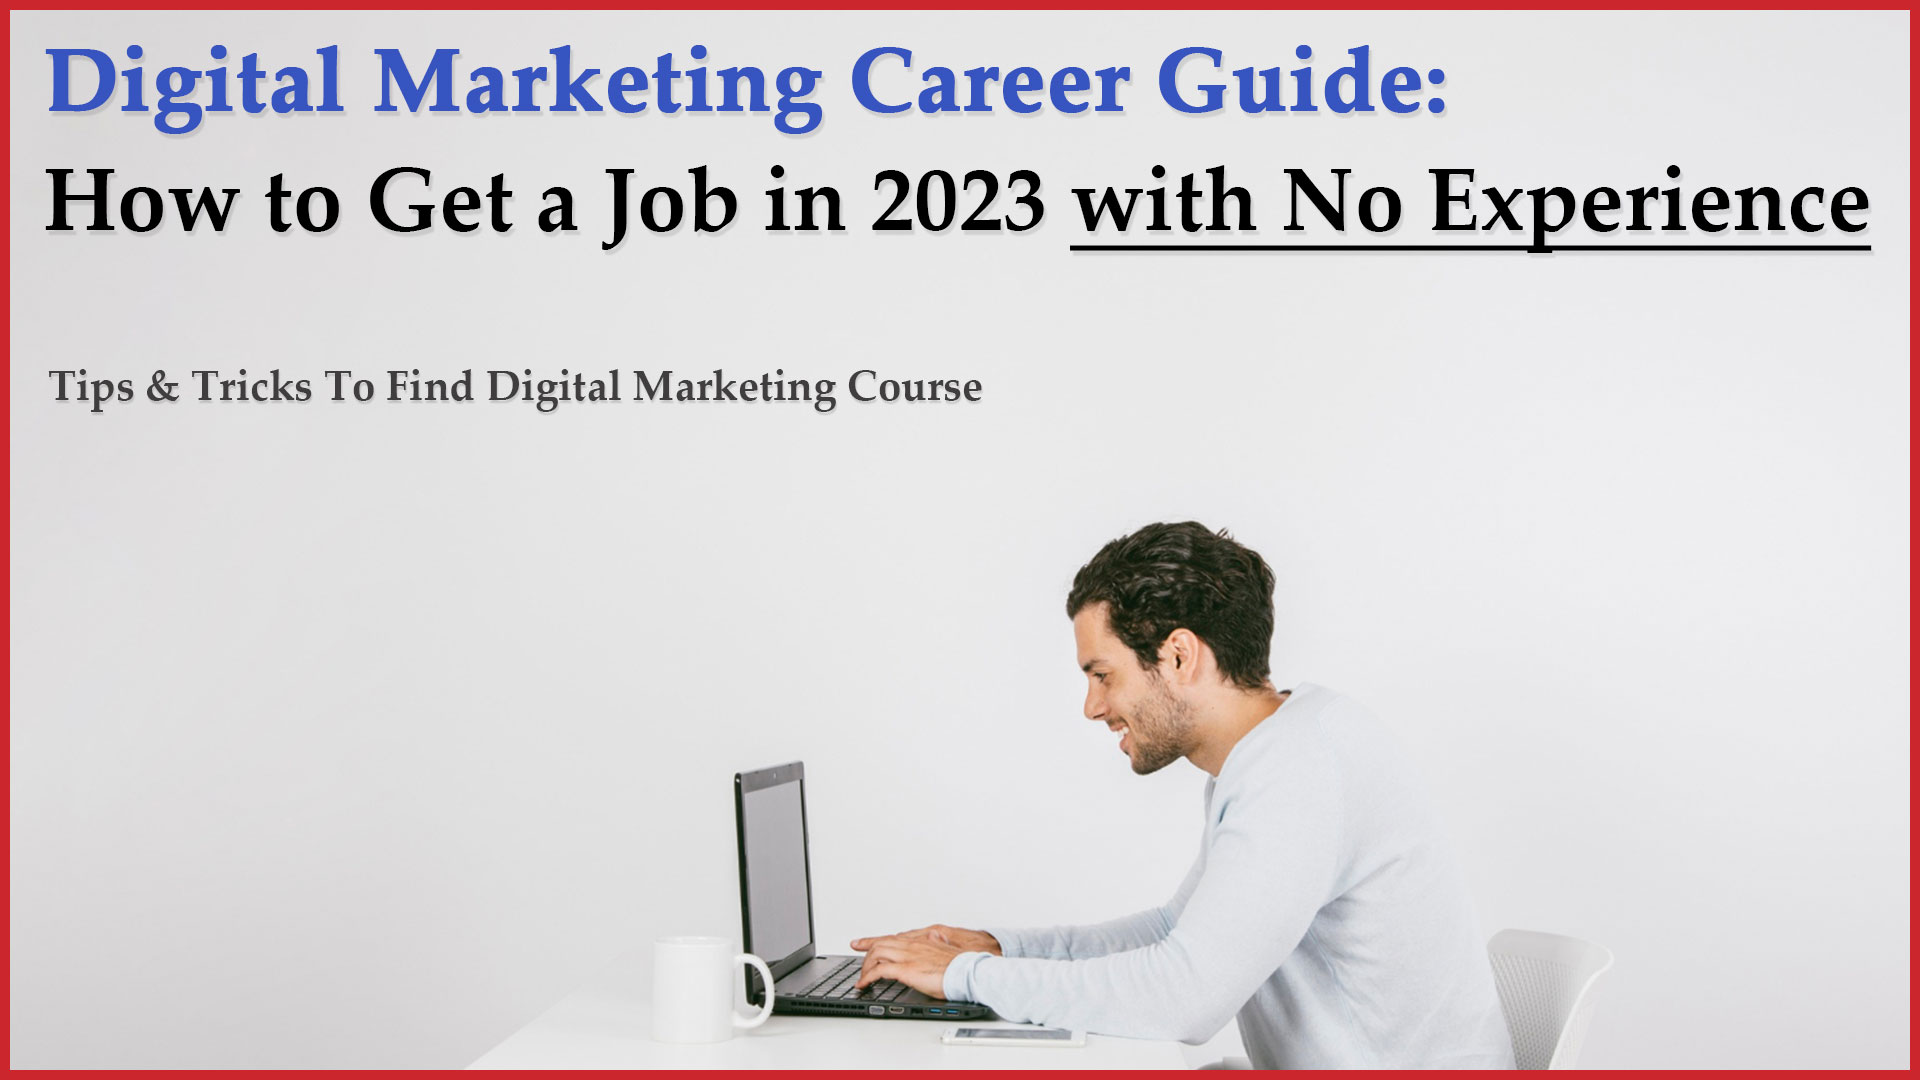 Digital-Marketing-Career-Guide-how-to-get-a-job-in-2023-with-no-experience